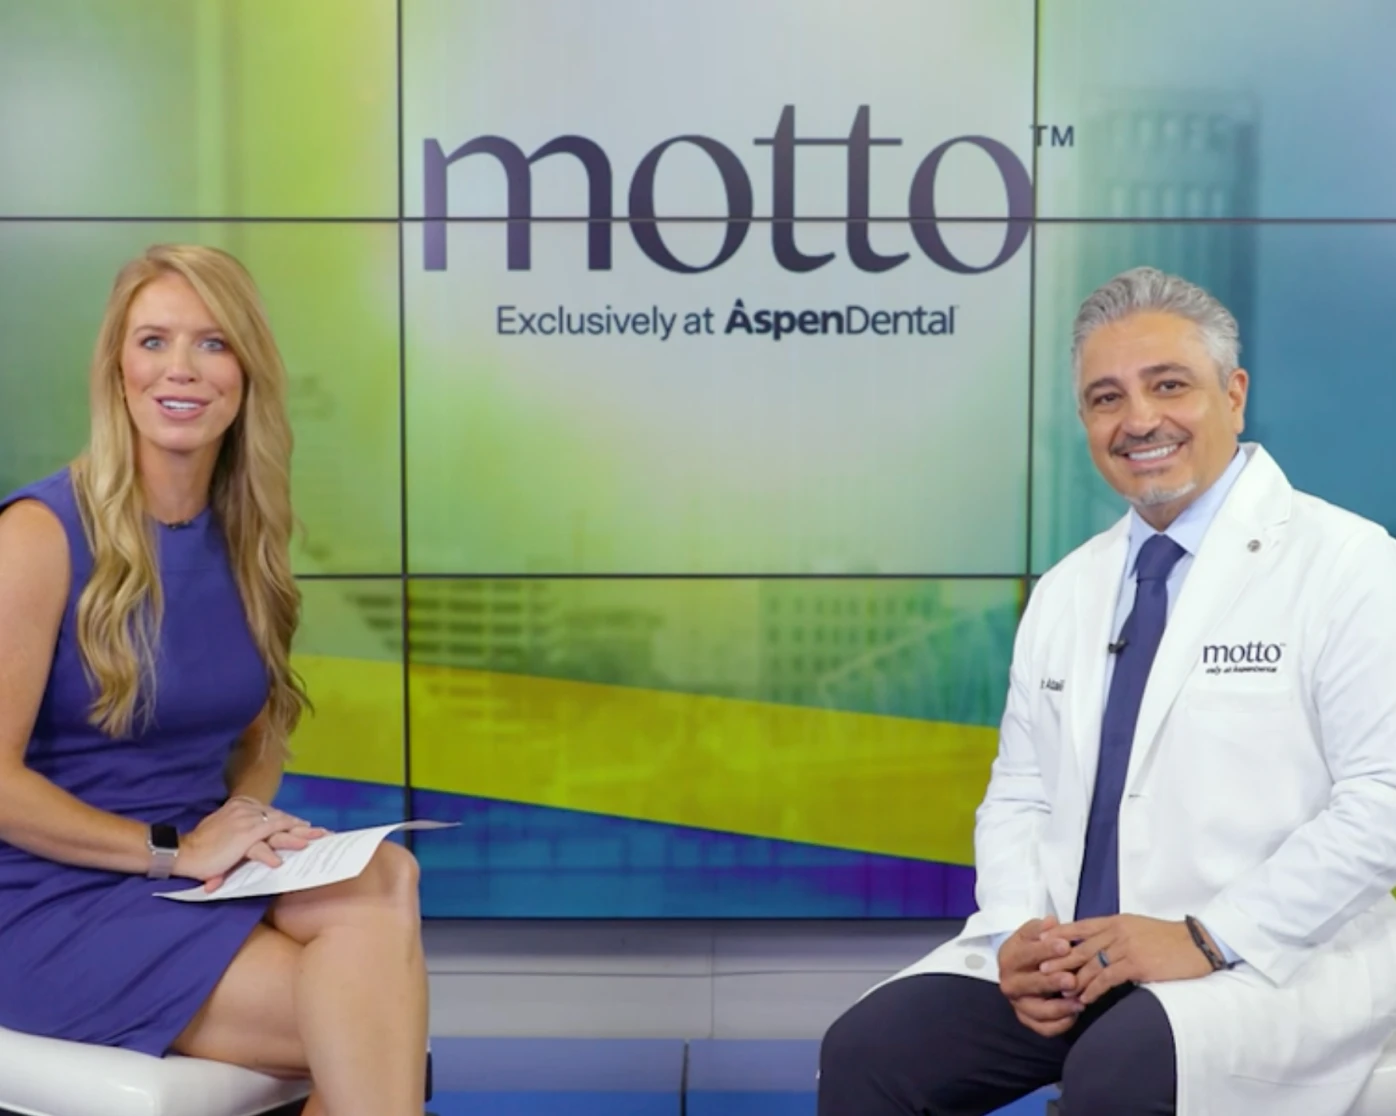 Dr. Ataii sits next to a smiling news anchor, with the text "Motto: Exclusively at Aspen Dental" in the background